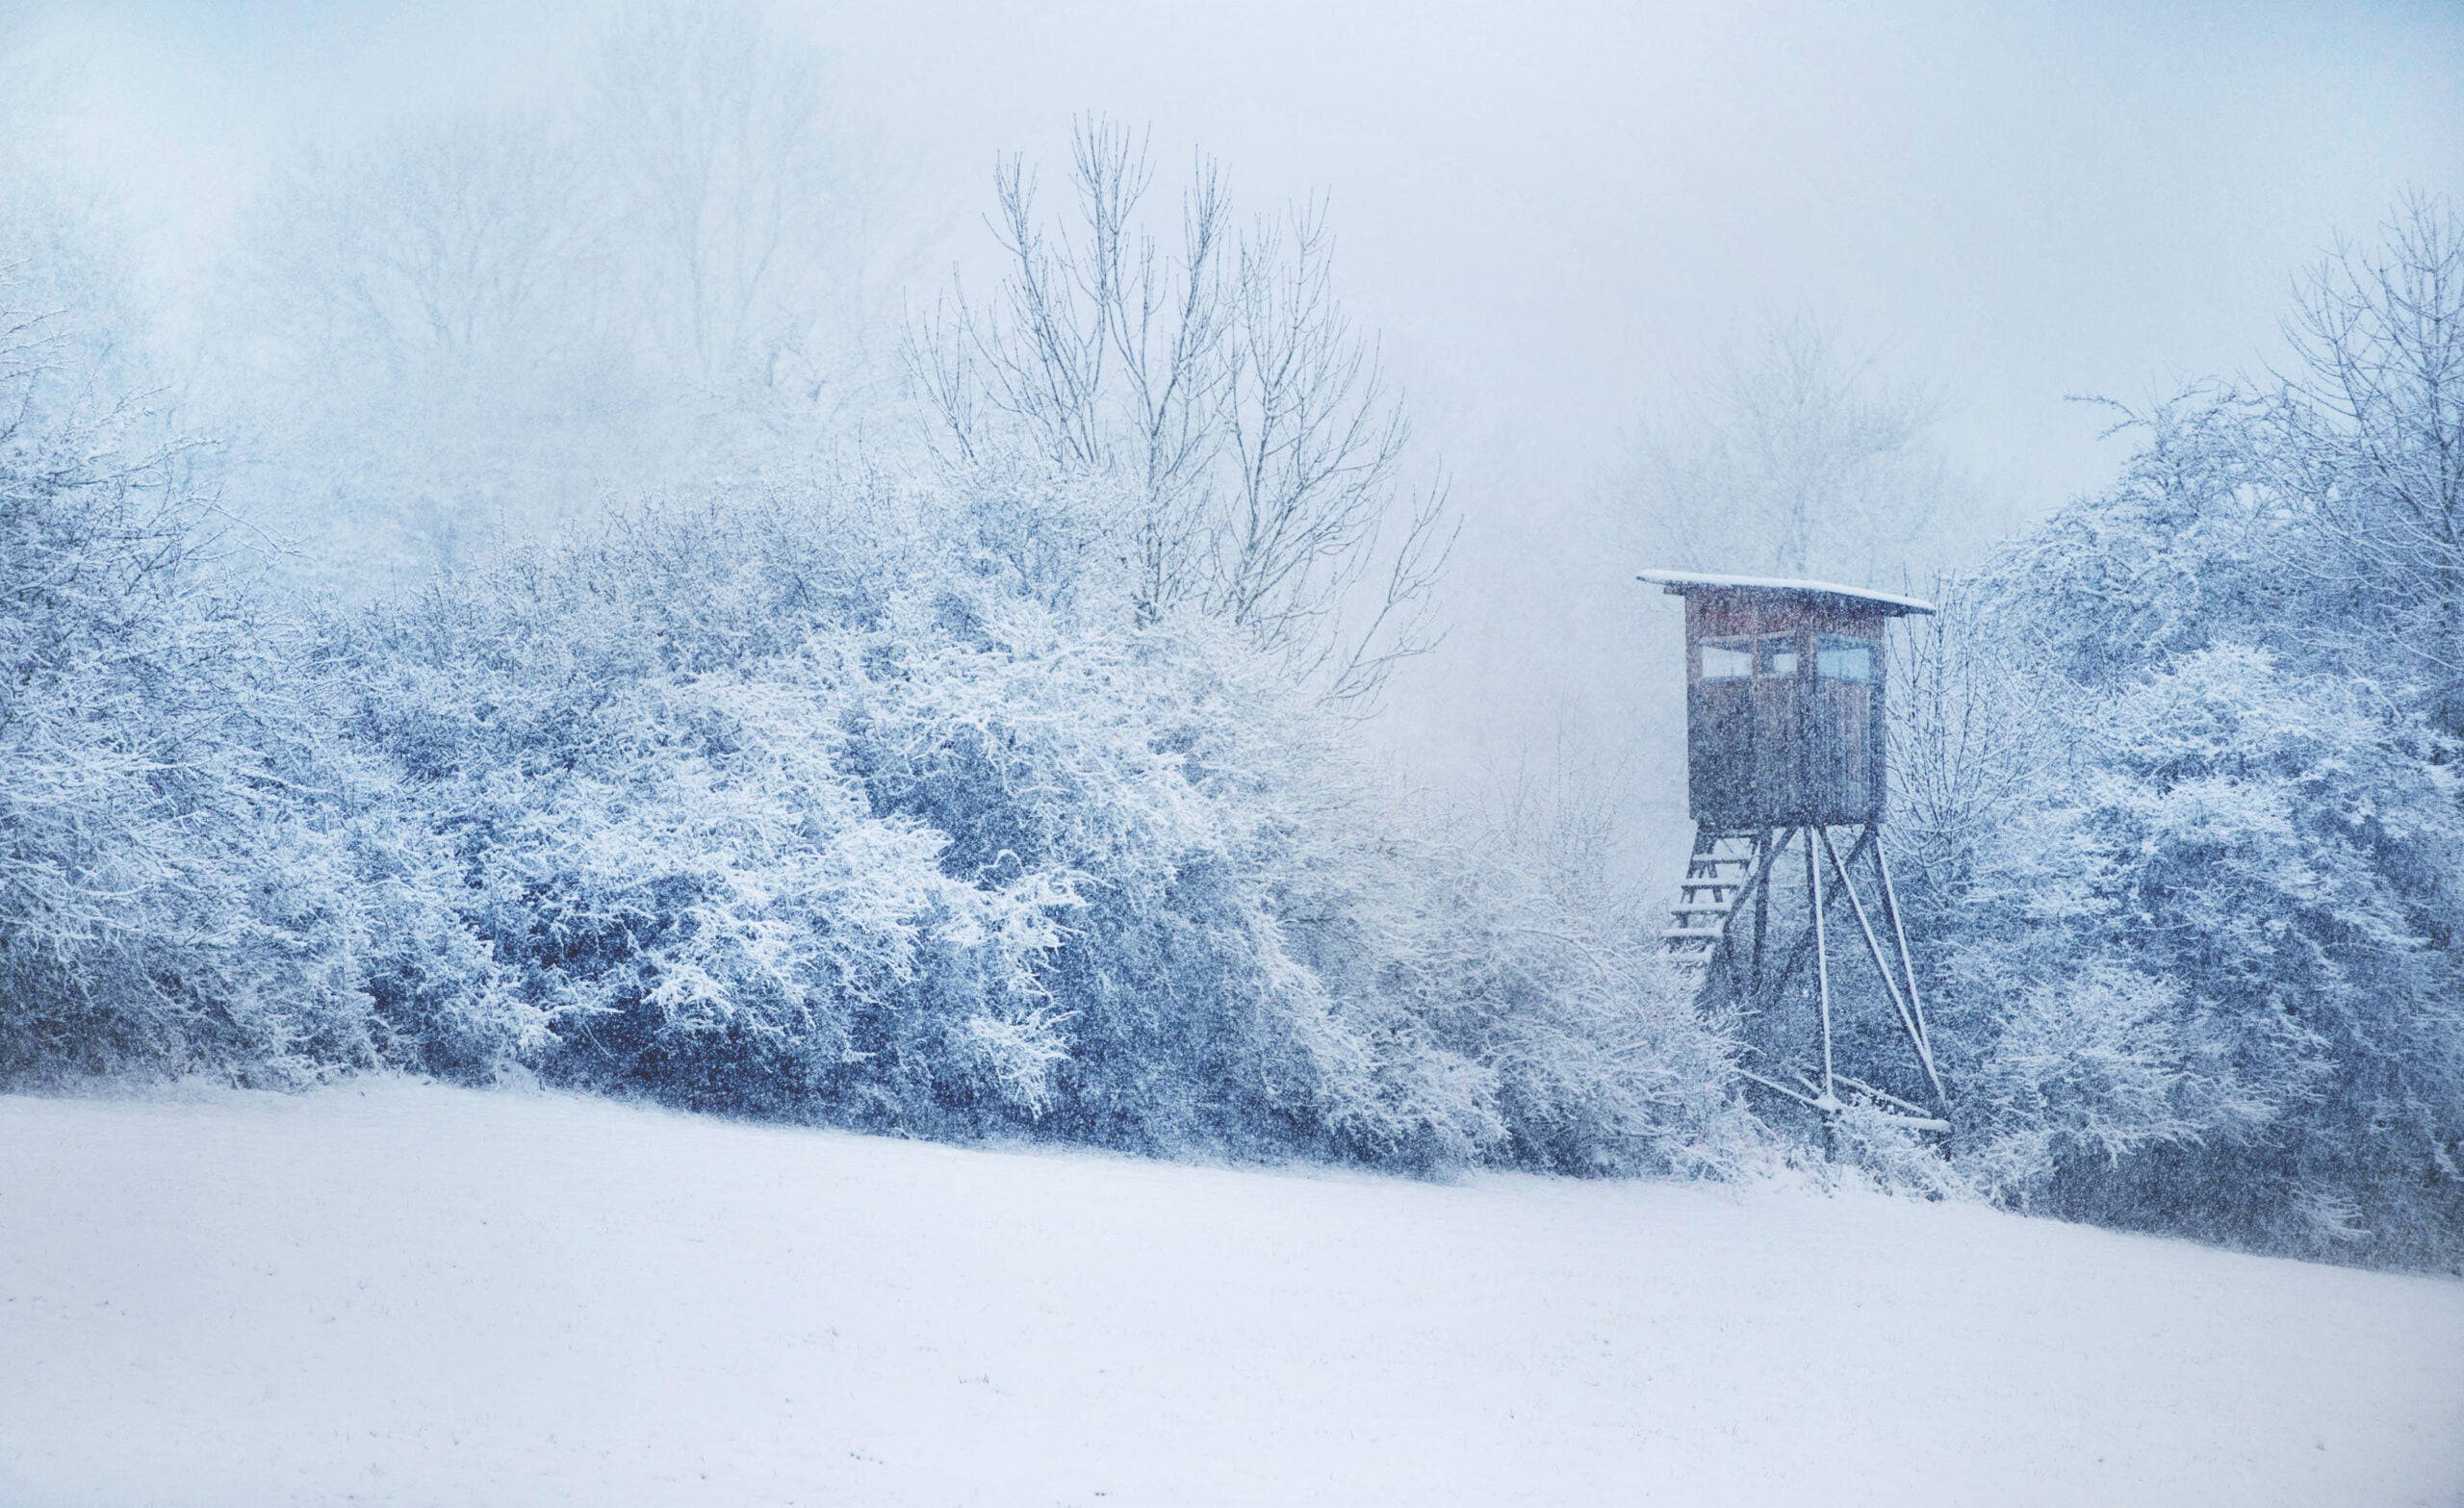 A photo of a hunting tree stand in winter weather.